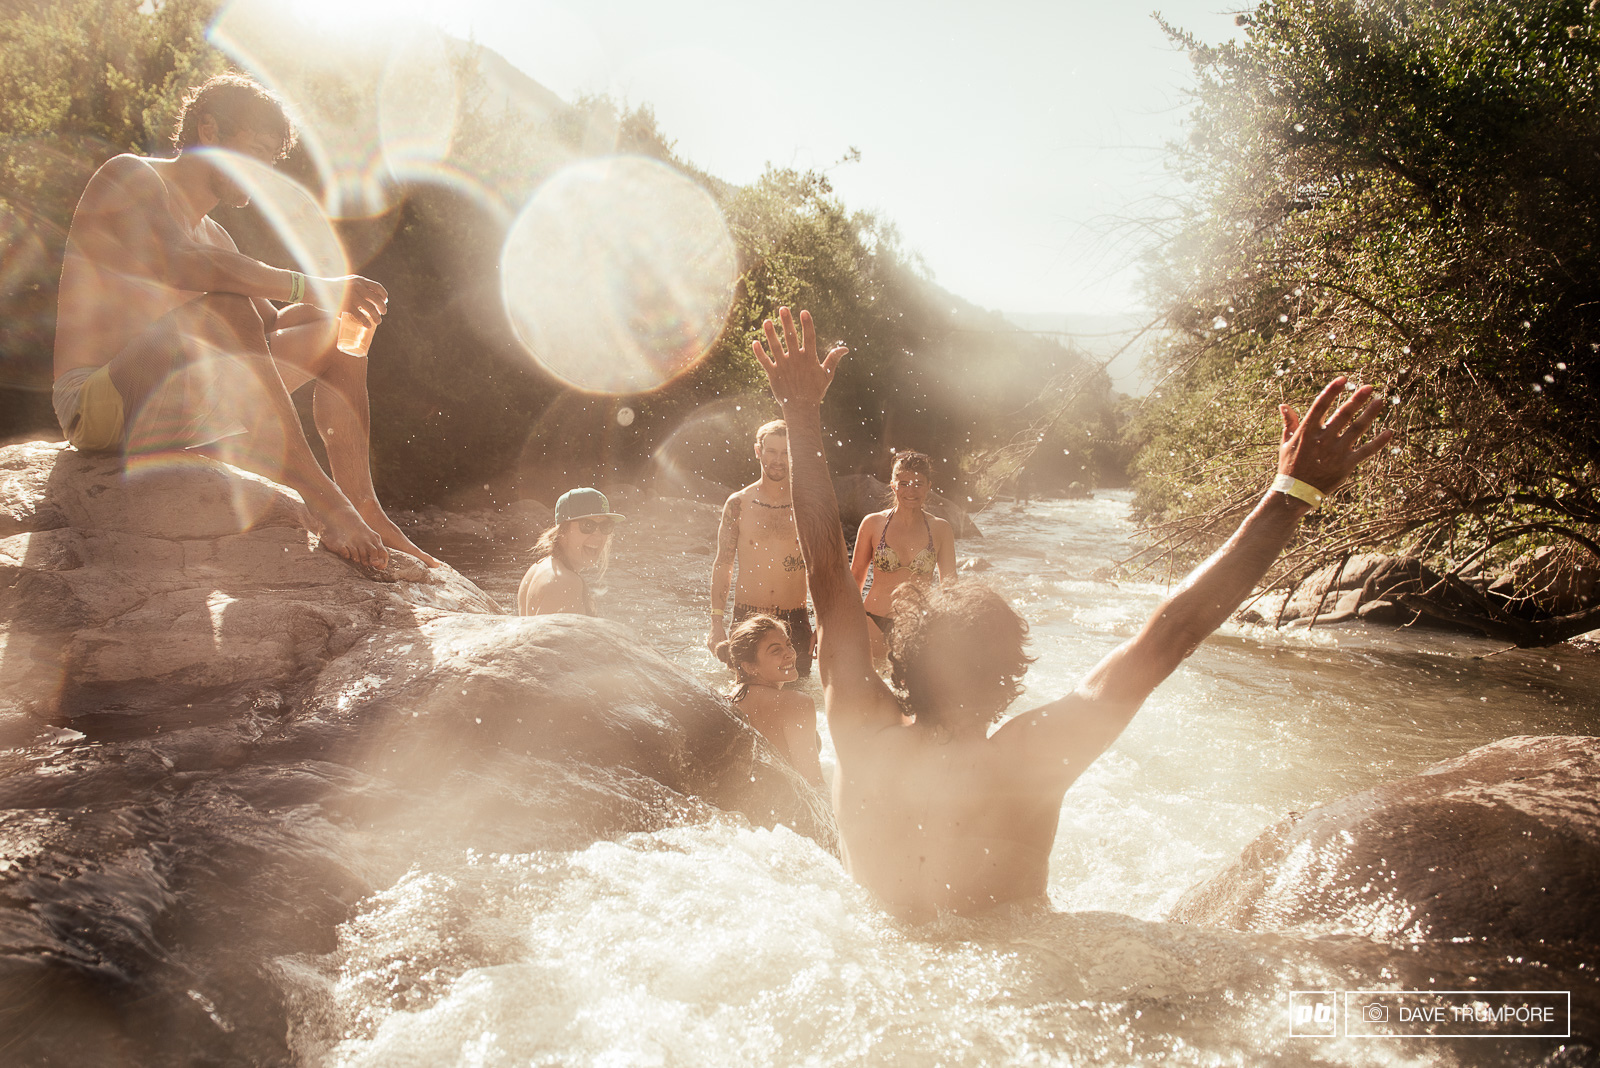 Iago Garay and friends enjoy some cold beers and natural waterslides next to the campsite as they unwind at the end of a very long day.